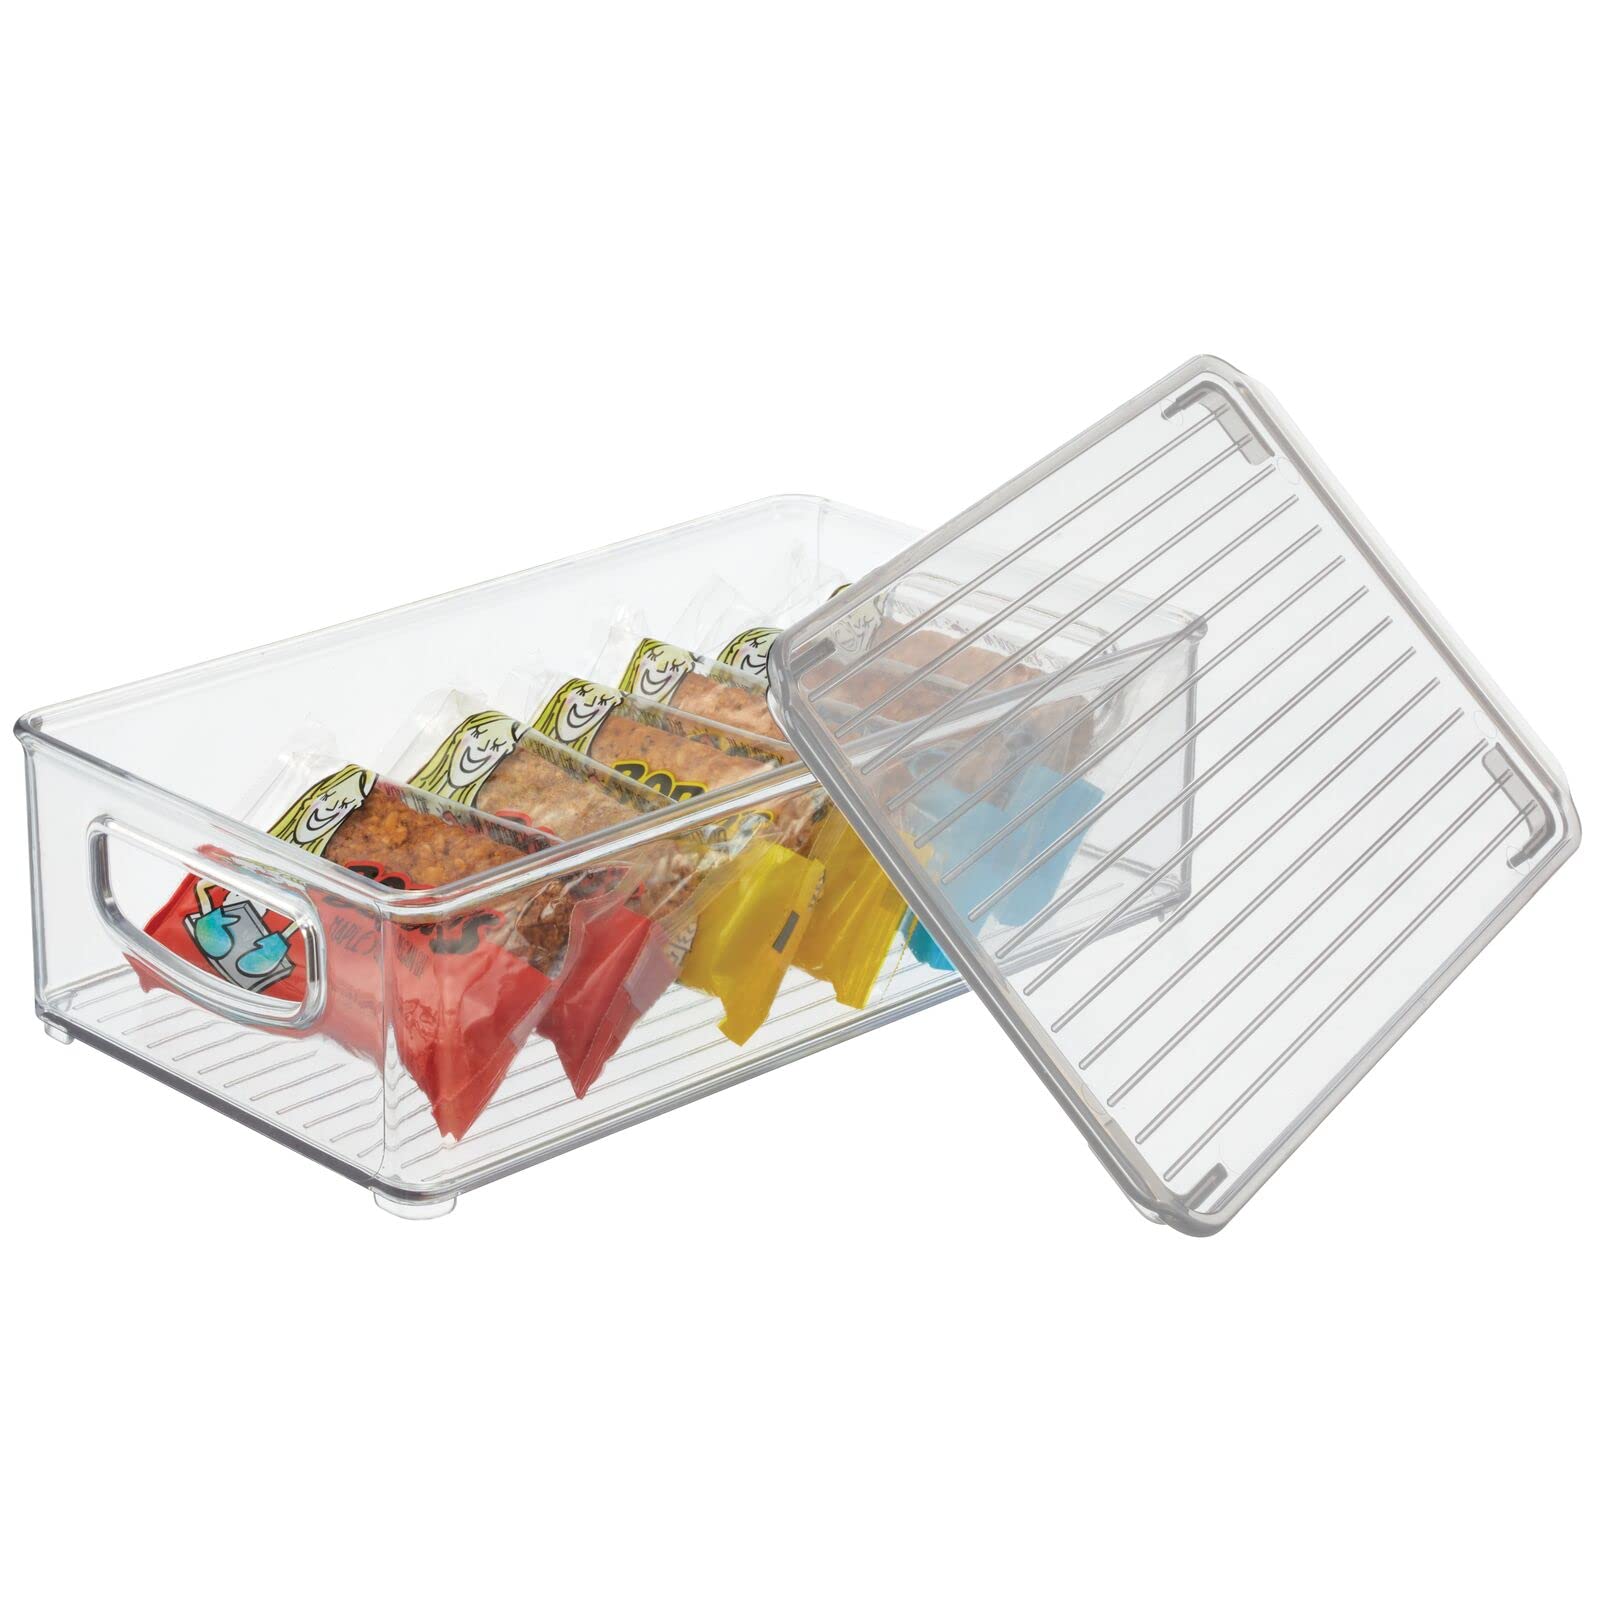 mDesign Plastic Pantry Storage Box Container with Lid and Built-In Handles - Organization for Flour, Cereal, Pasta, Rice, or Food in Kitchen Cupboard, Ligne Collection, 8 Pack, Clear/Clear